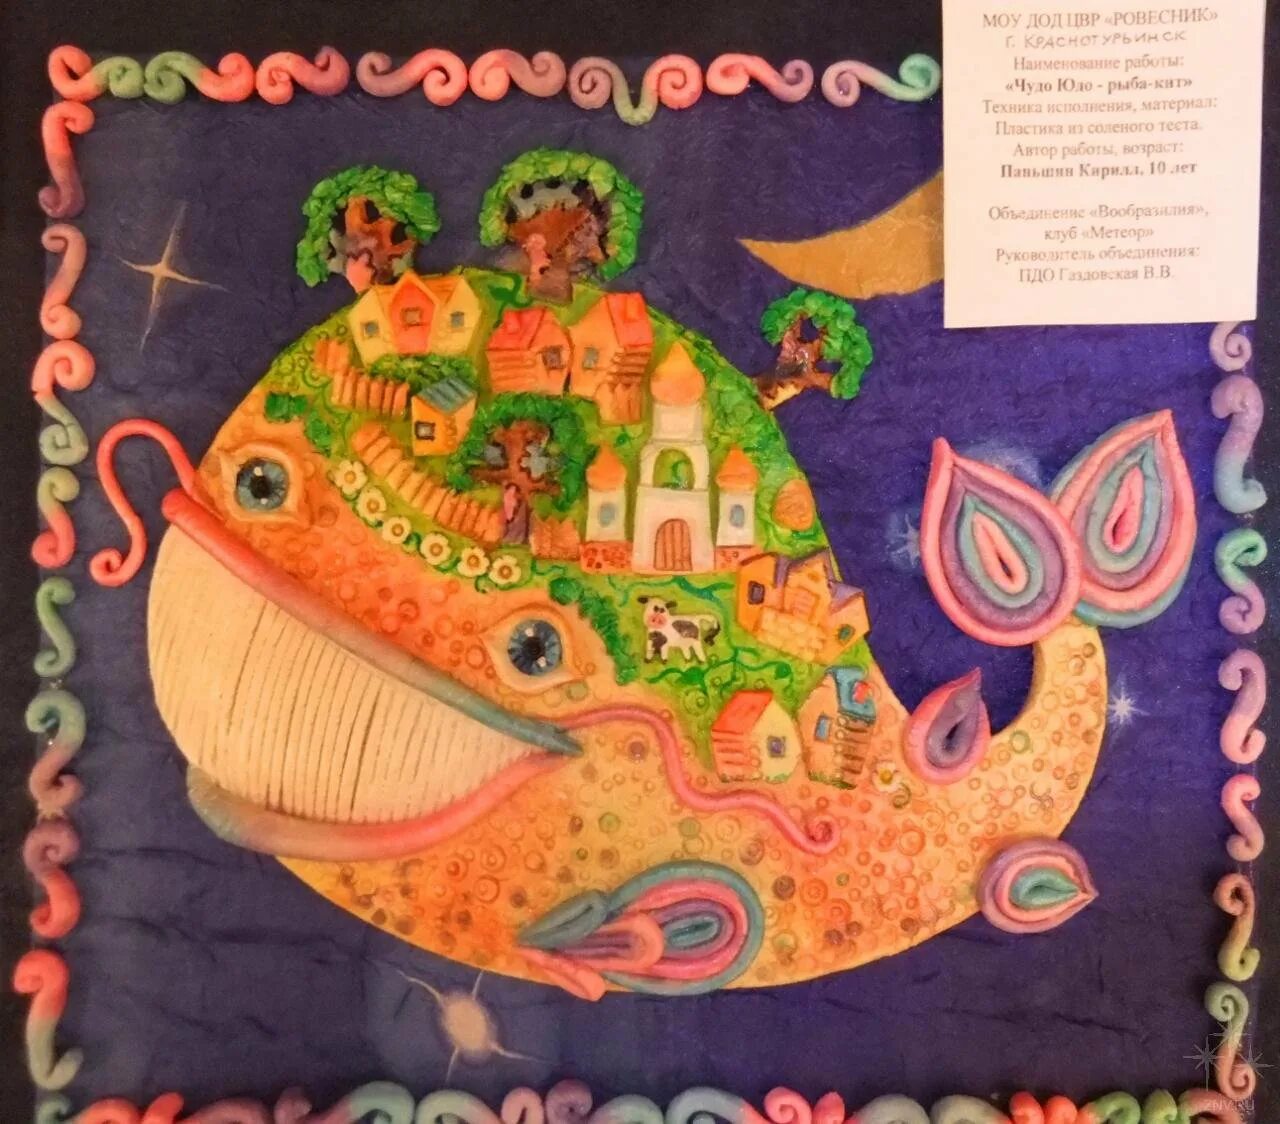 Colorfully decorated miracle fish yudo whale